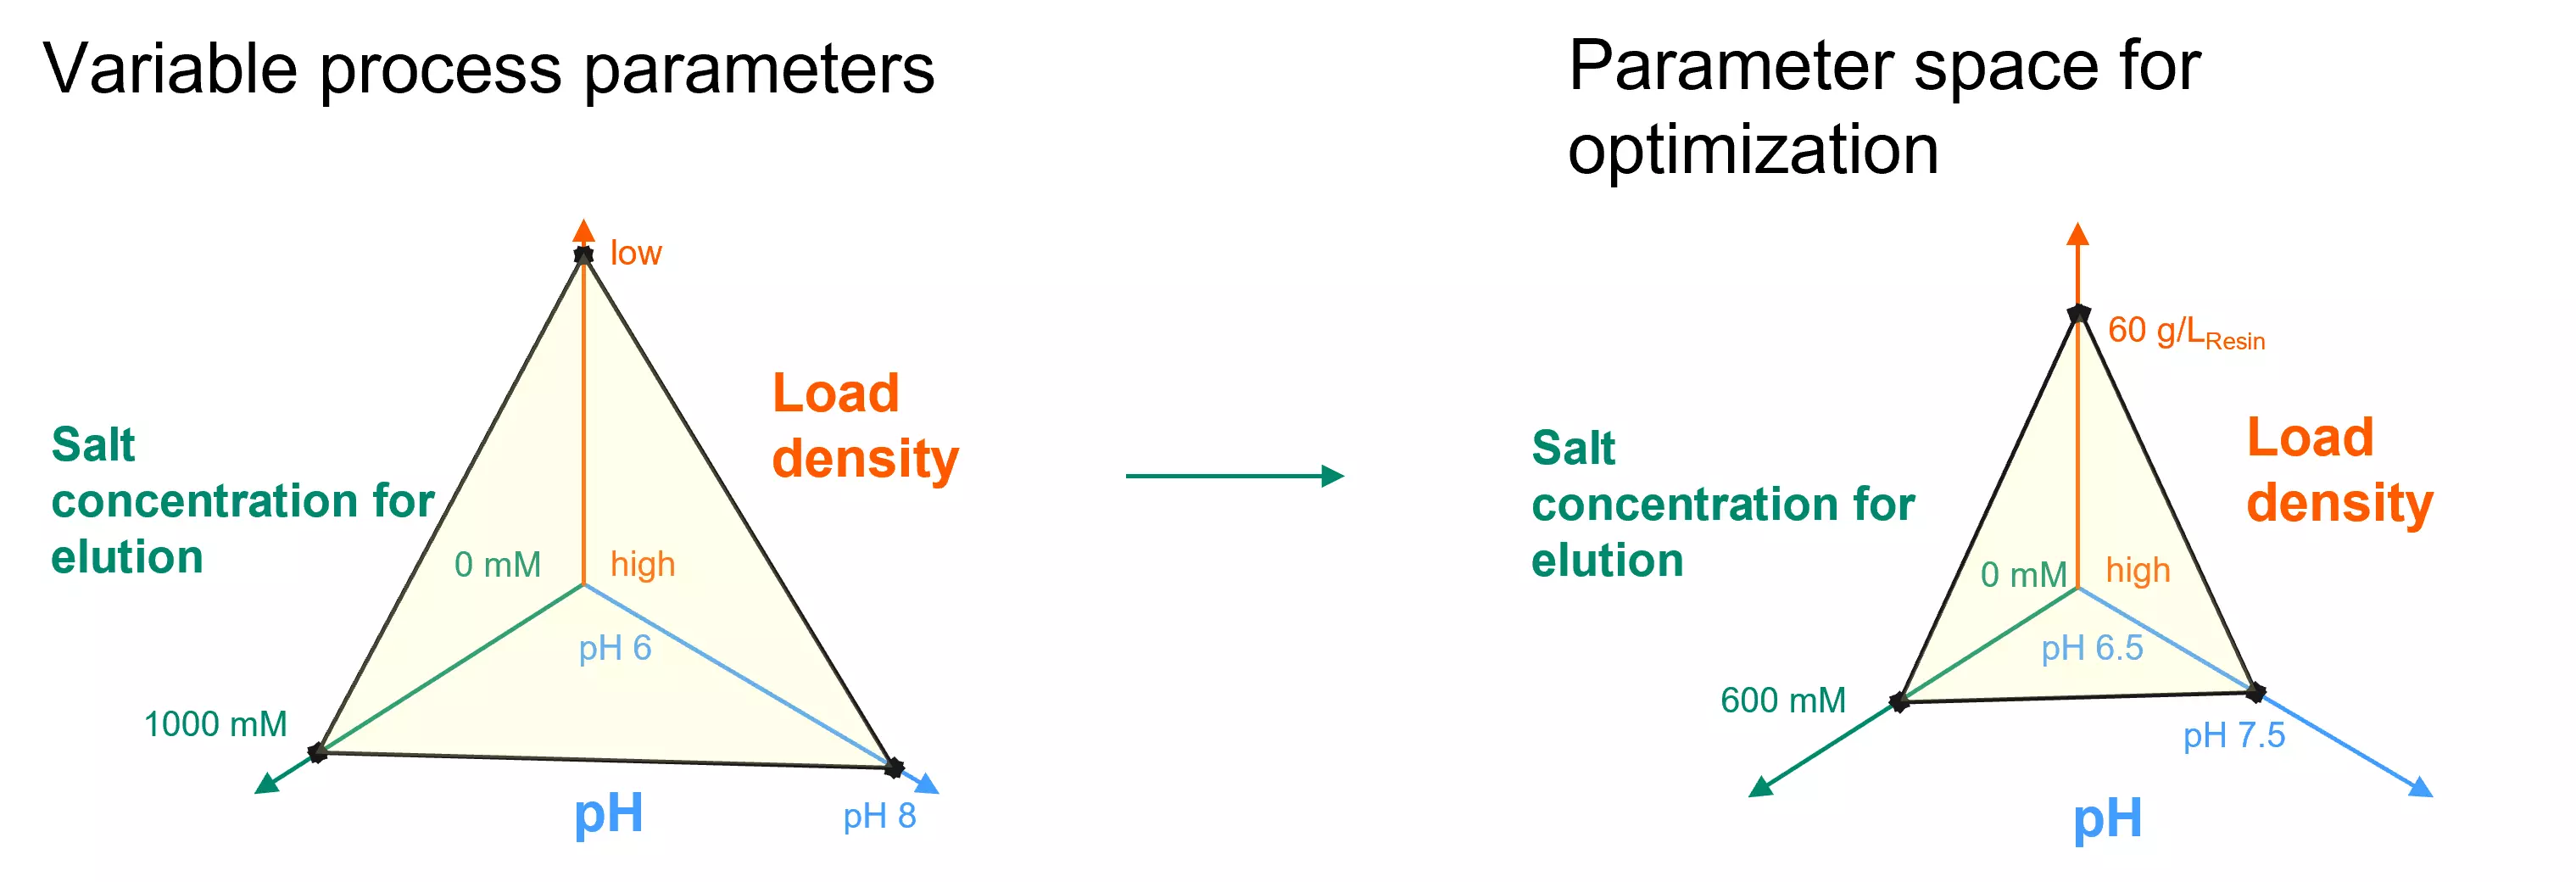 Figure 2: Parameter space before and after definition of boundaries for variable process parameters 